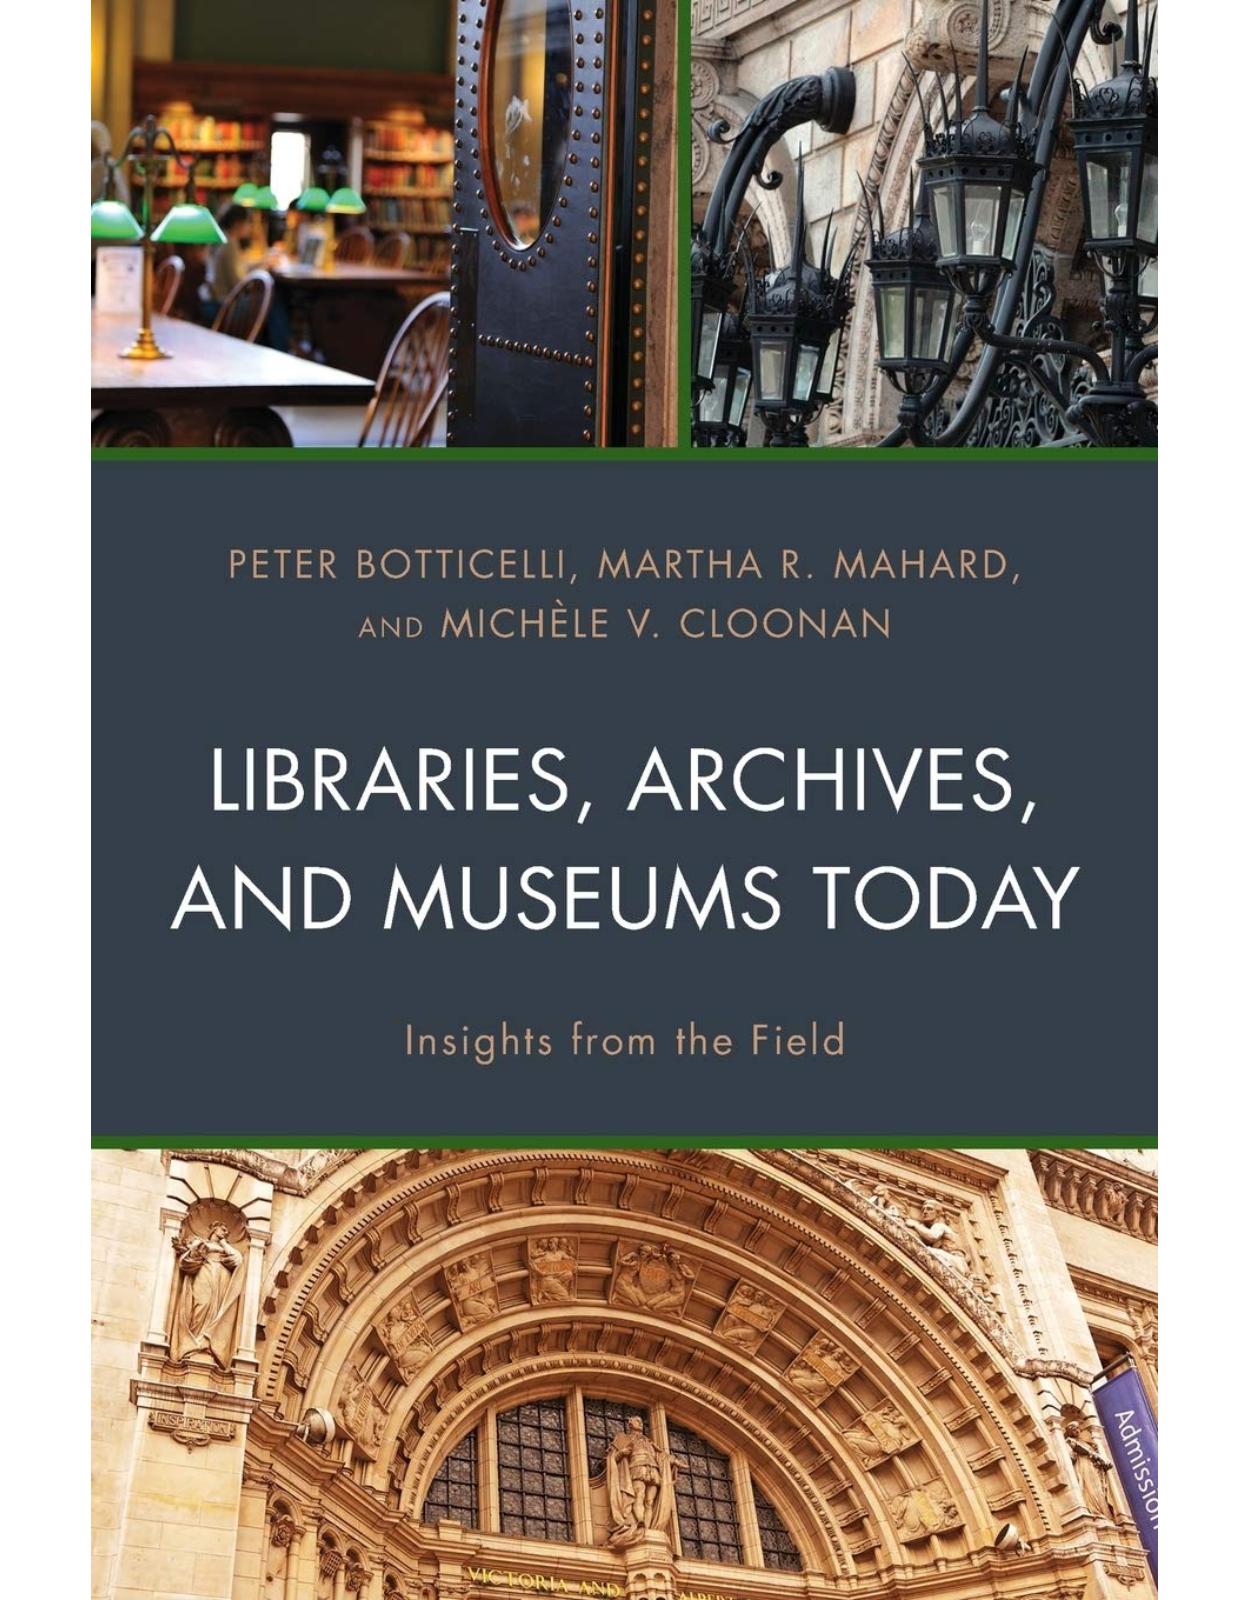 Libraries, Archives, and Museums Today Insights from the Field